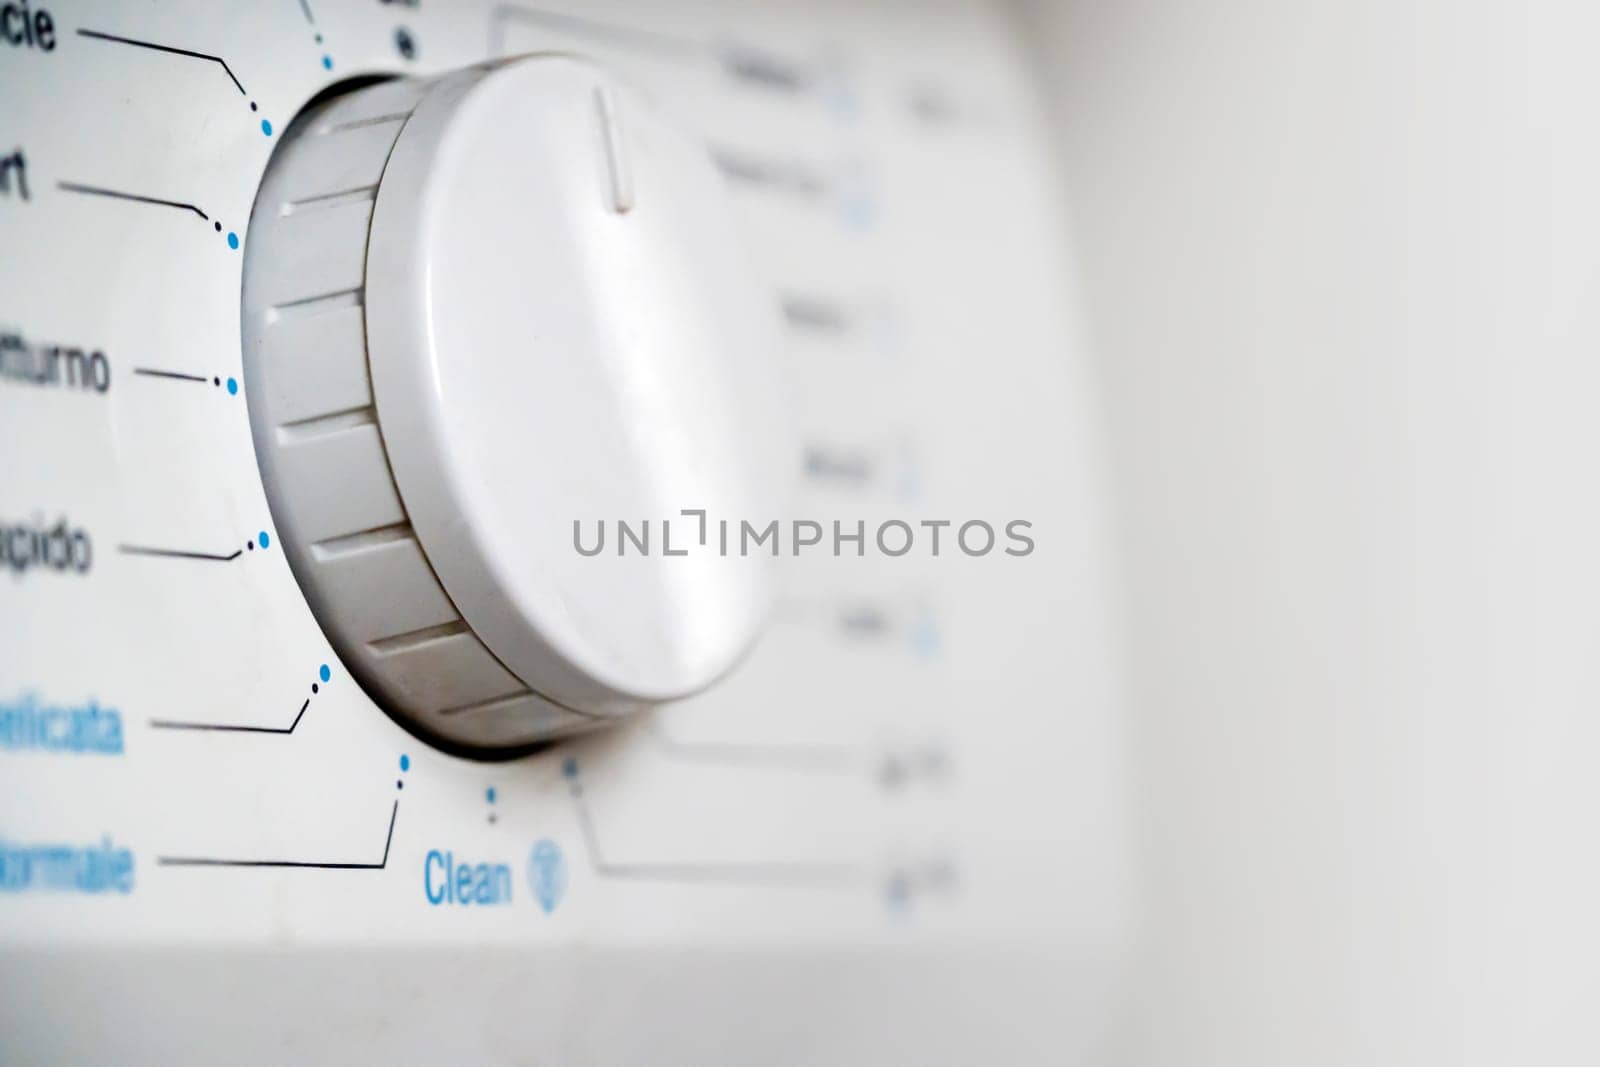 Washing machine with different modes of washing, spinning and rinsing clothes in the house, an assistant for hygiene and cleanliness, white control buttons close-up.